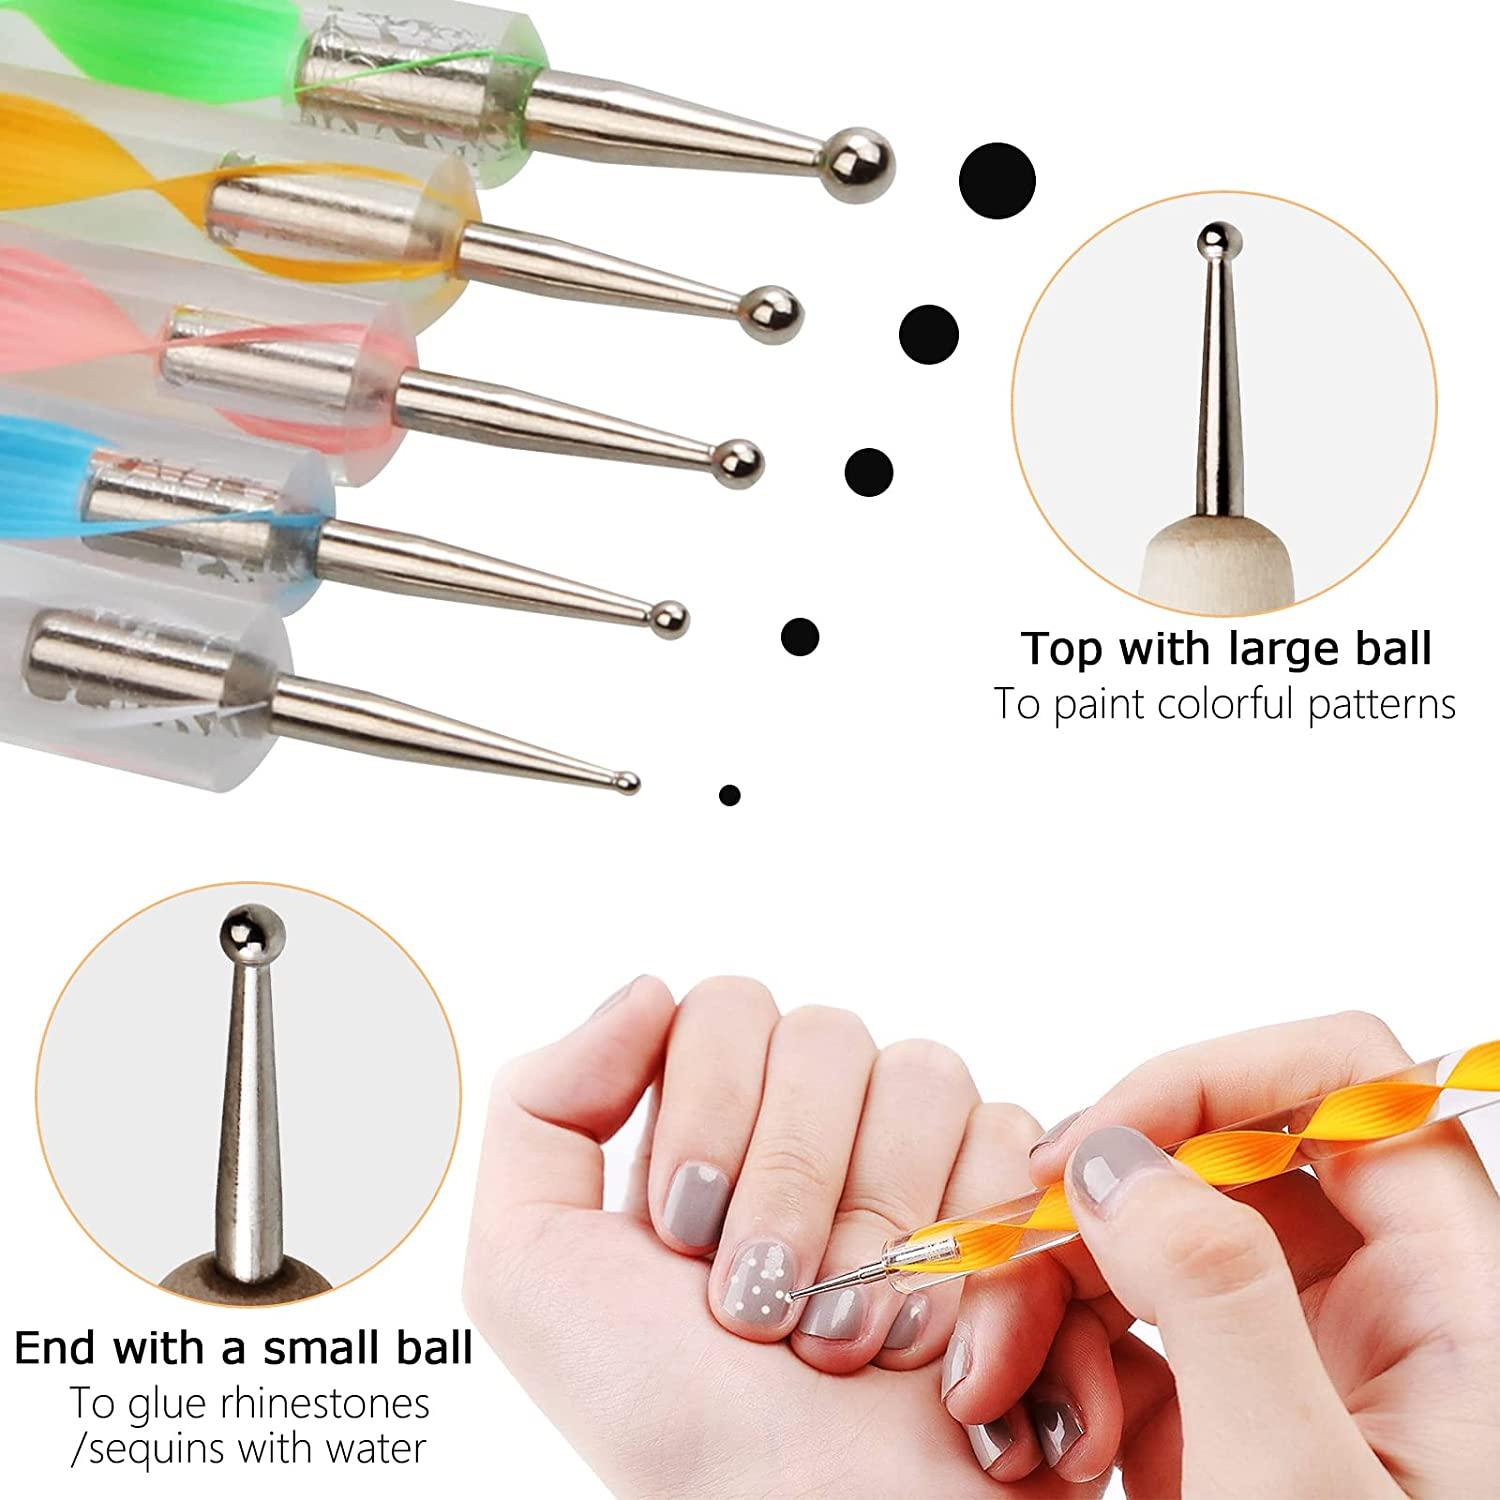 Dotting Tools 101: The Definitive Guide to Getting Dotty - How to Use  Dotting Tools for Nail Art (Tips, Tutor…